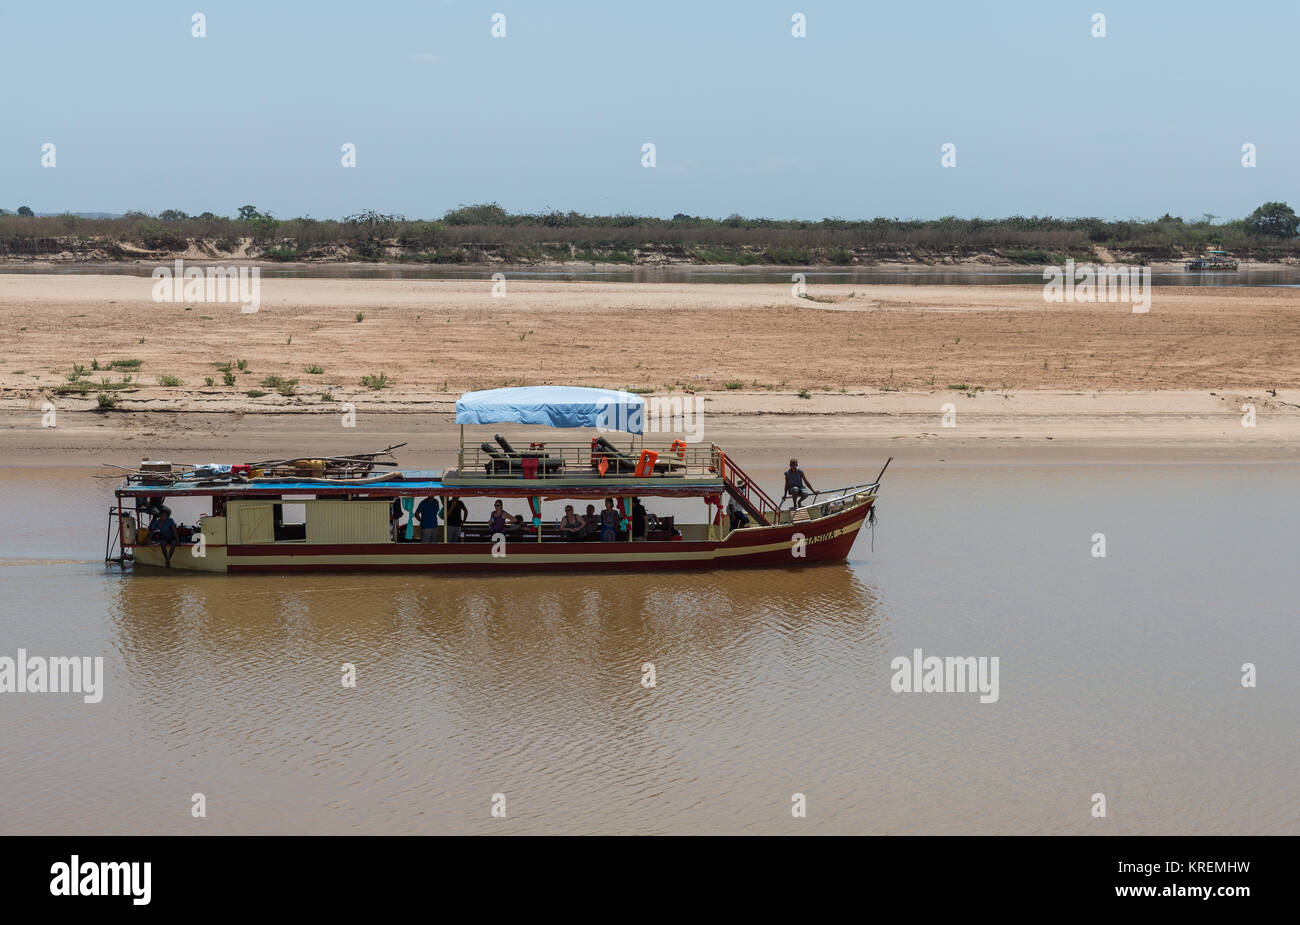 River cruise carries tourists along Mania River. Madagascar, Africa. Stock Photo